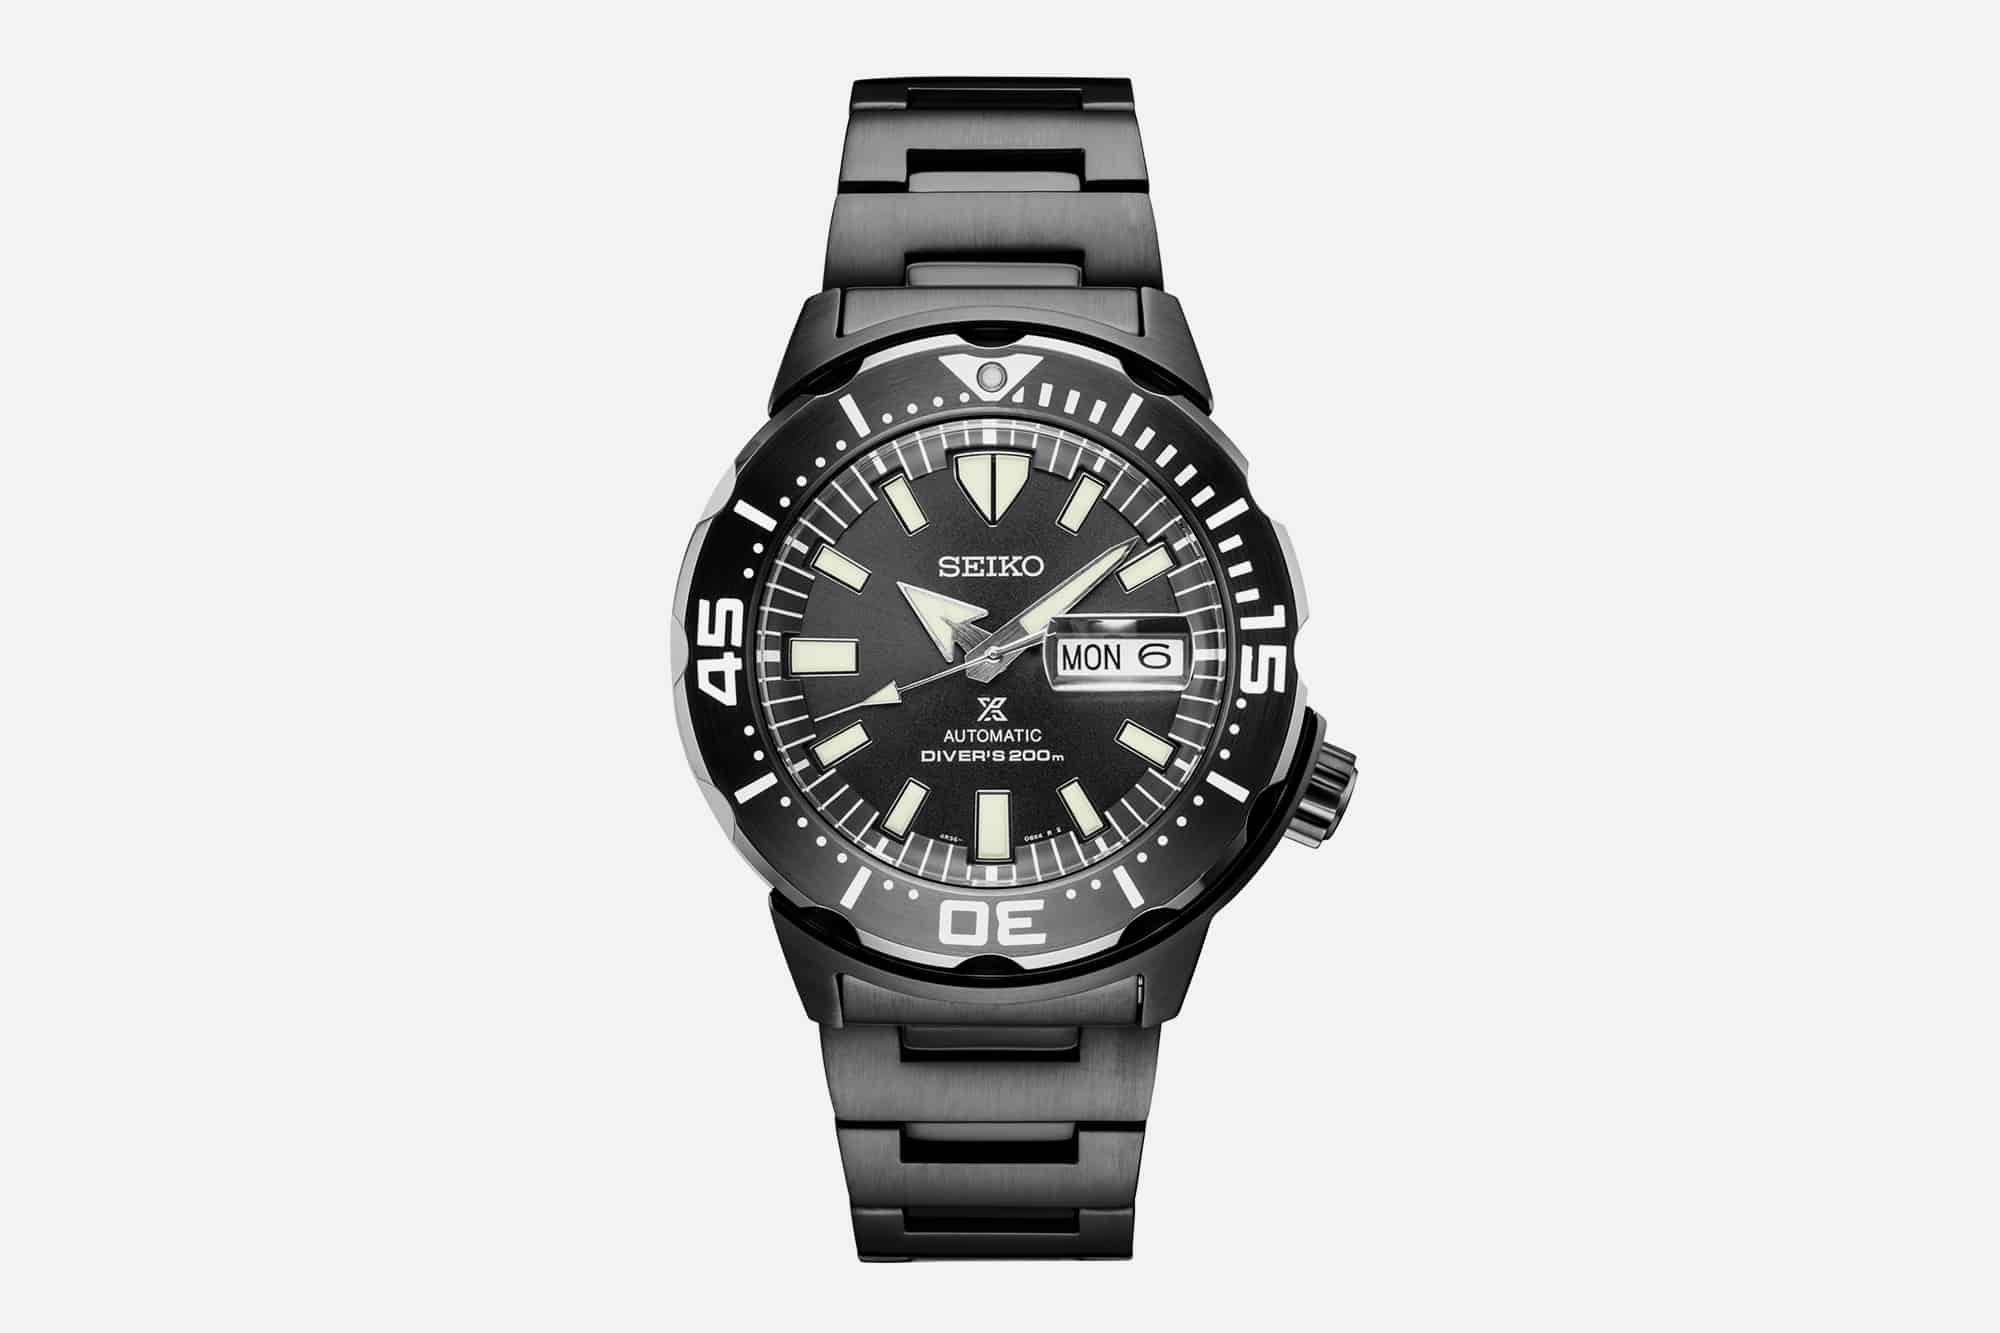 Introducing the King of the “Monsters,” the Seiko USA Exclusive Ref. SRPD29